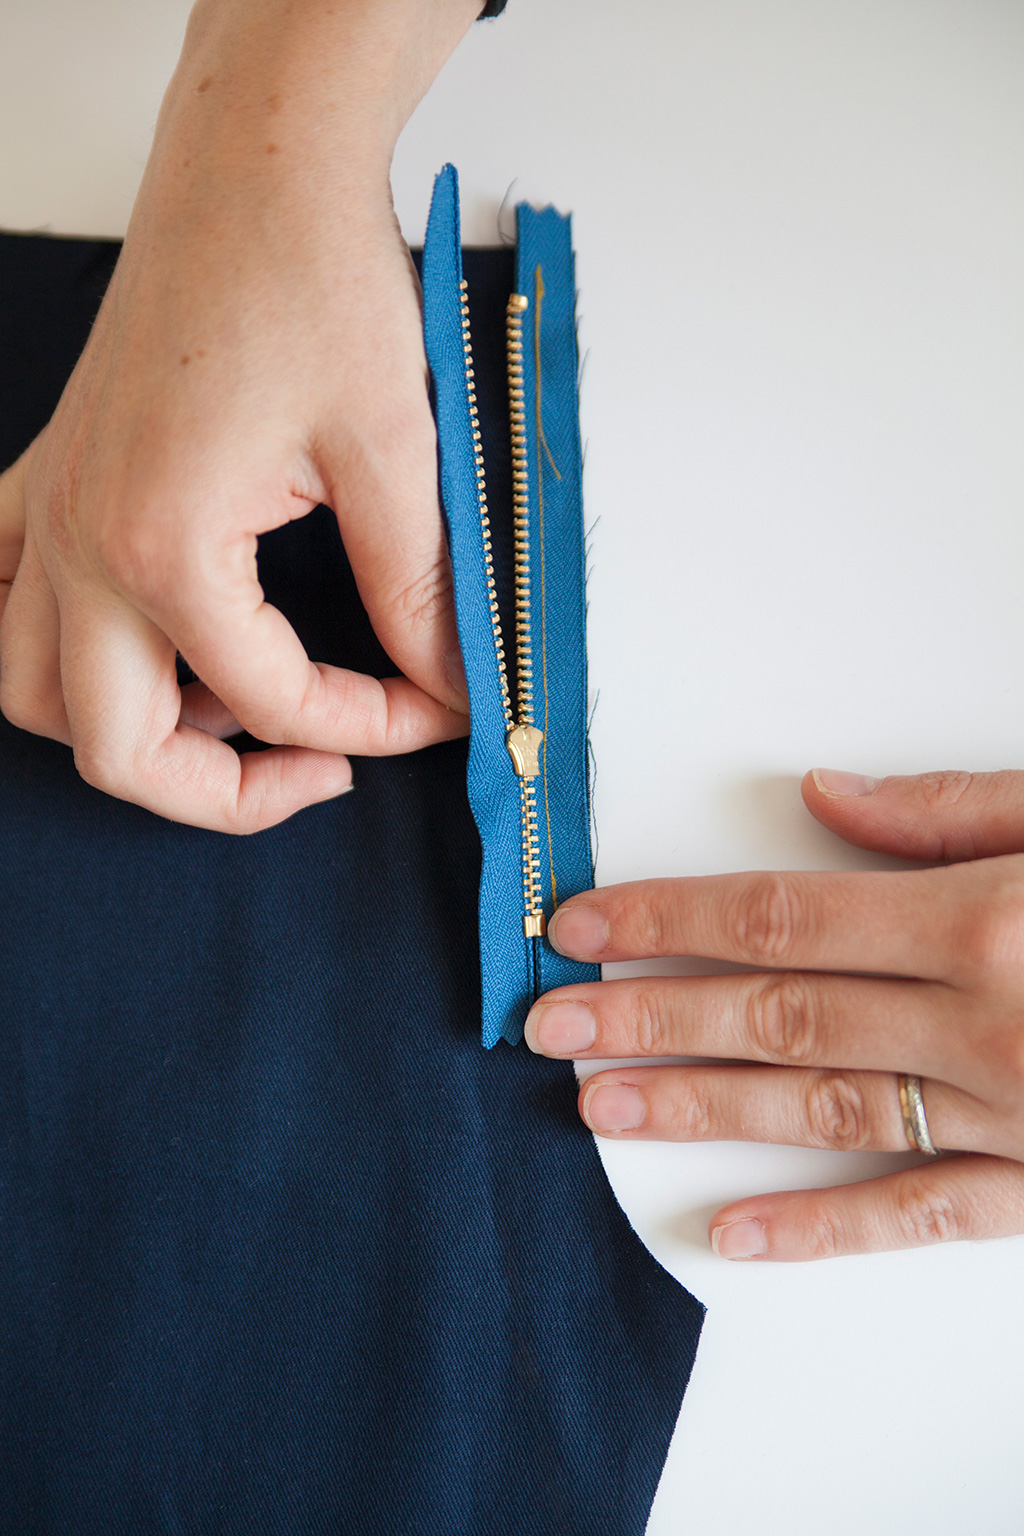 3 Expert Tips for Sewing Zippers